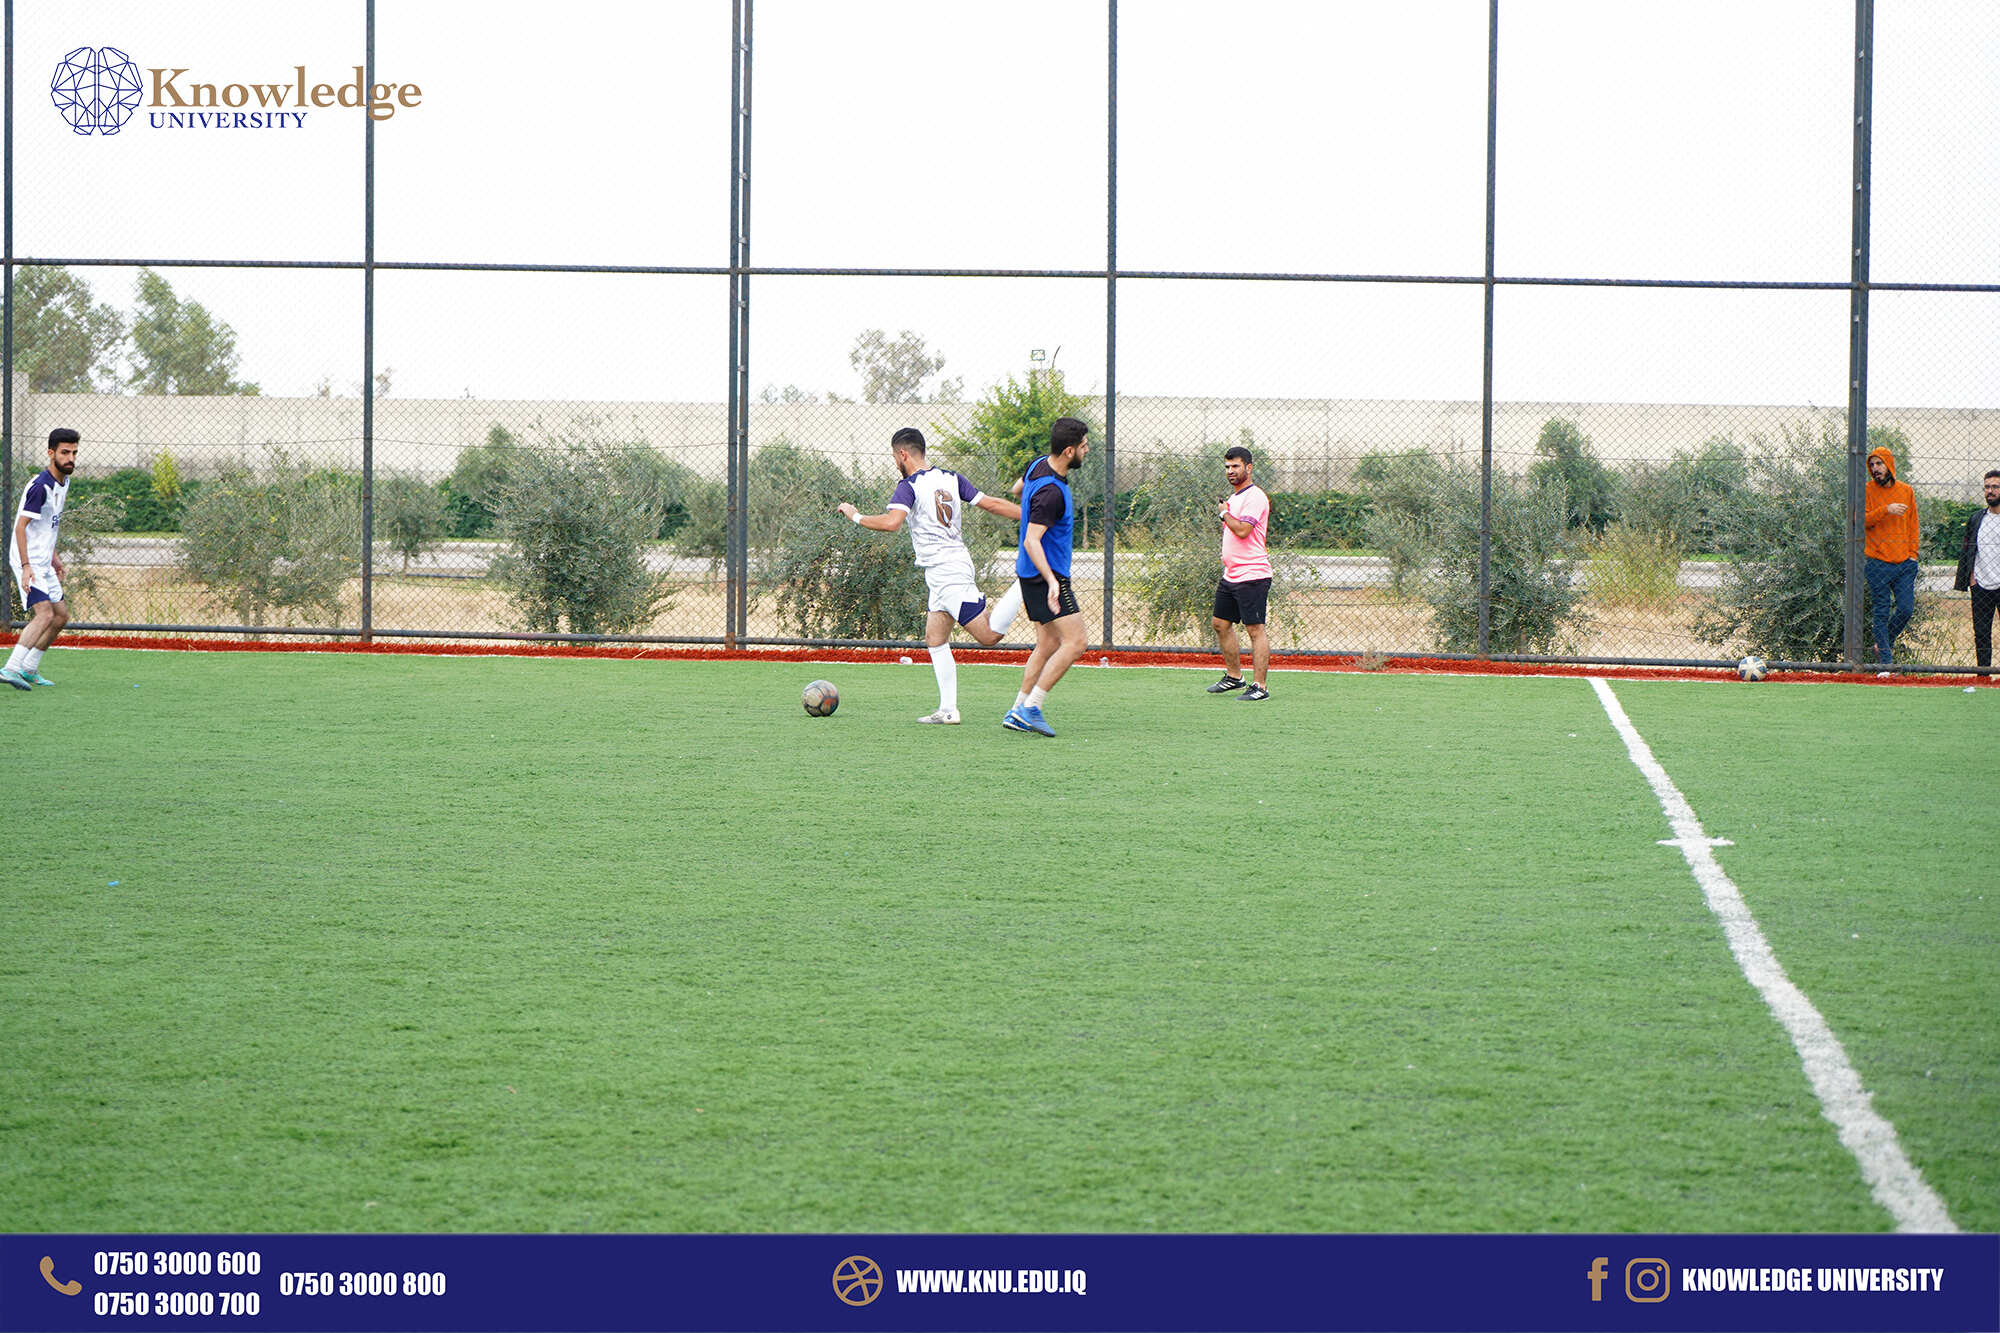 Third Stages Seize Victory in College of Pharmacy Football Tournament 